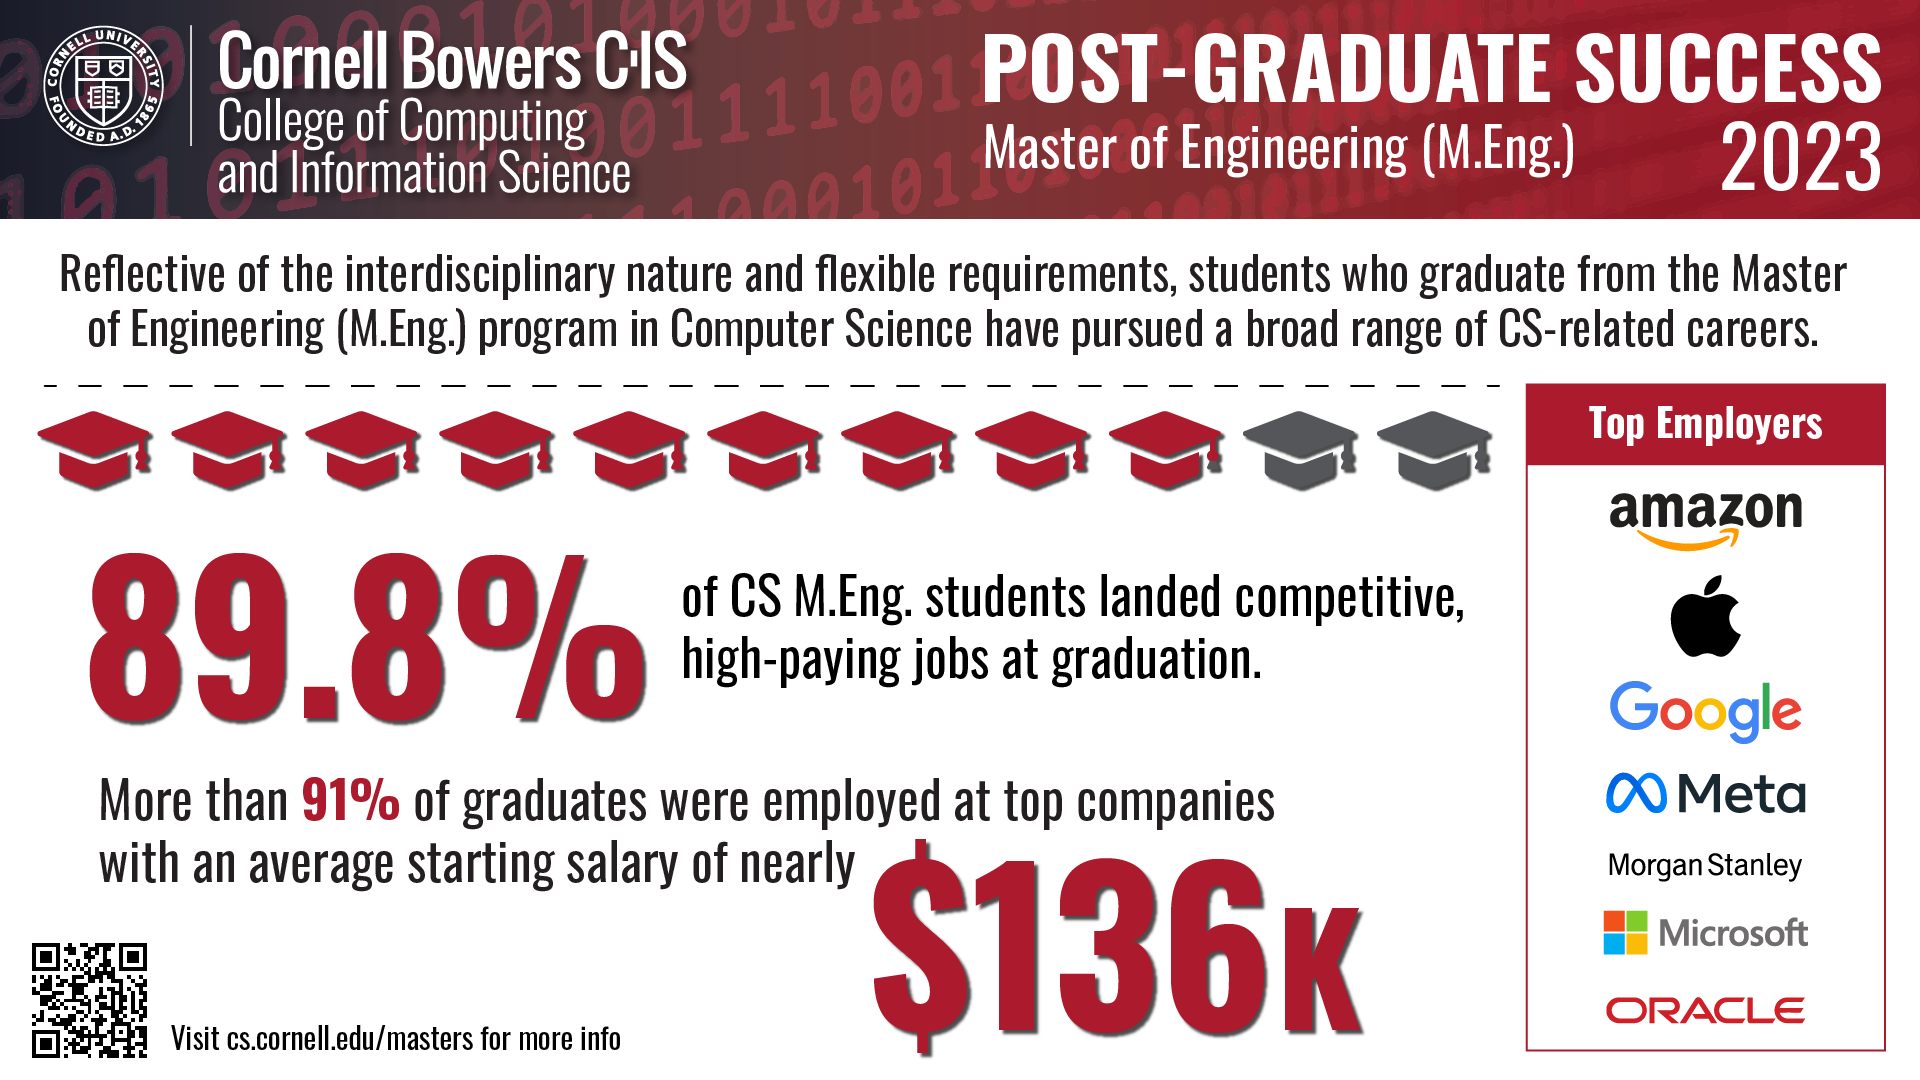 A graphic highlighting the post graduate success at Cornell Bowers CIS